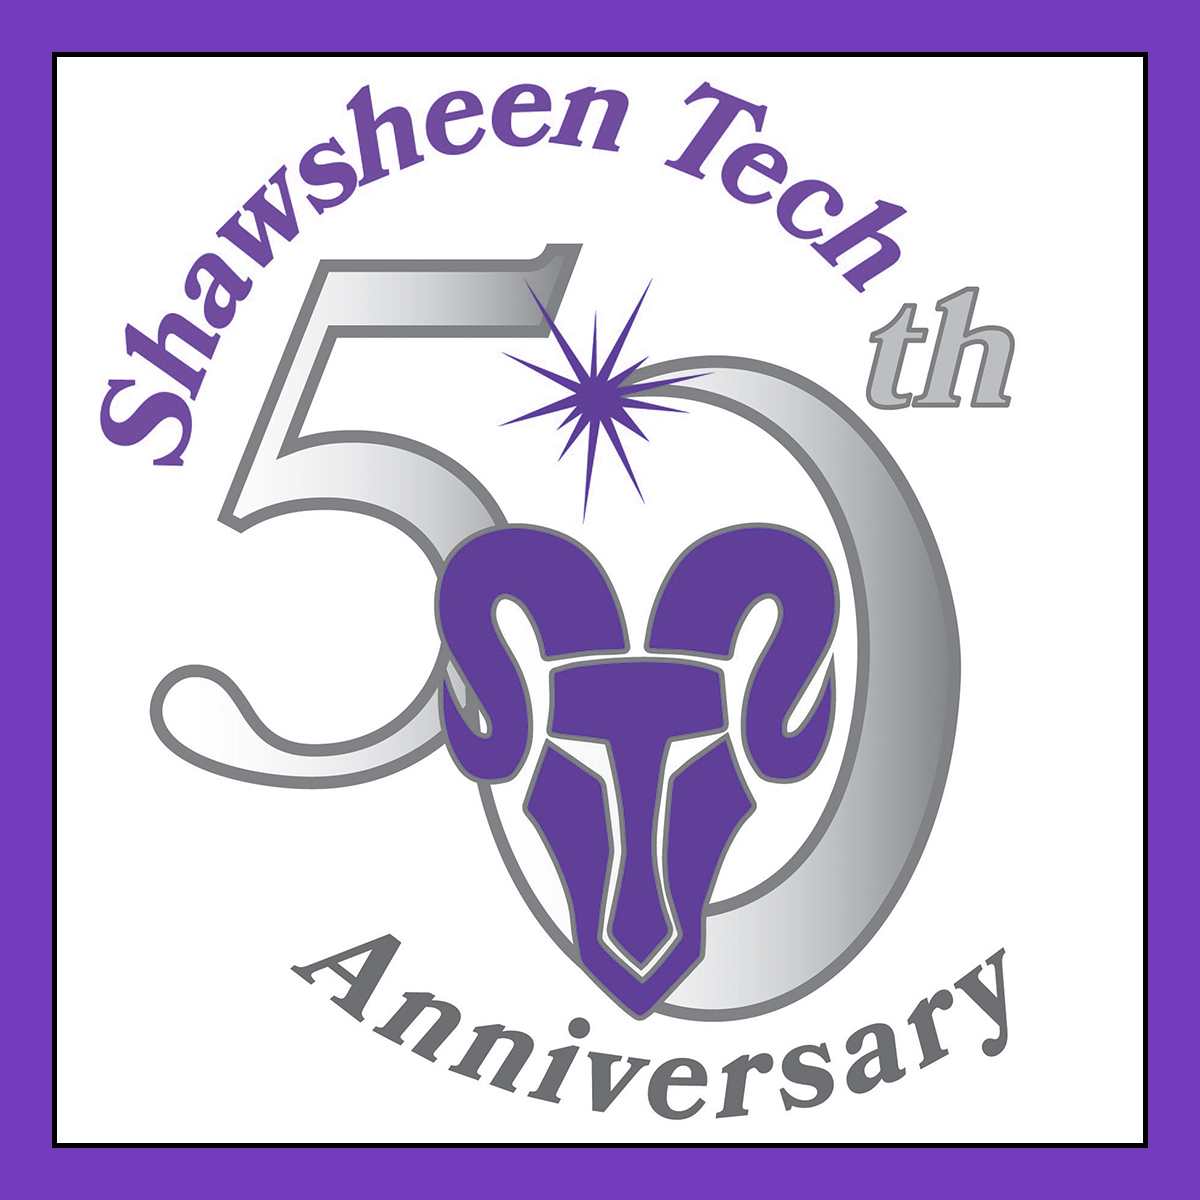 Reminder: Shawsheen's 50th Anniversary Celebration is today Saturday, May 11th from 9:00am-11:00am! 🎉Alumni tickets are $10, and proceeds go to scholarships. Get tickets at shorturl.at/bfQY3. See you there! @svthsaa_alumni #WeAreShawsheen